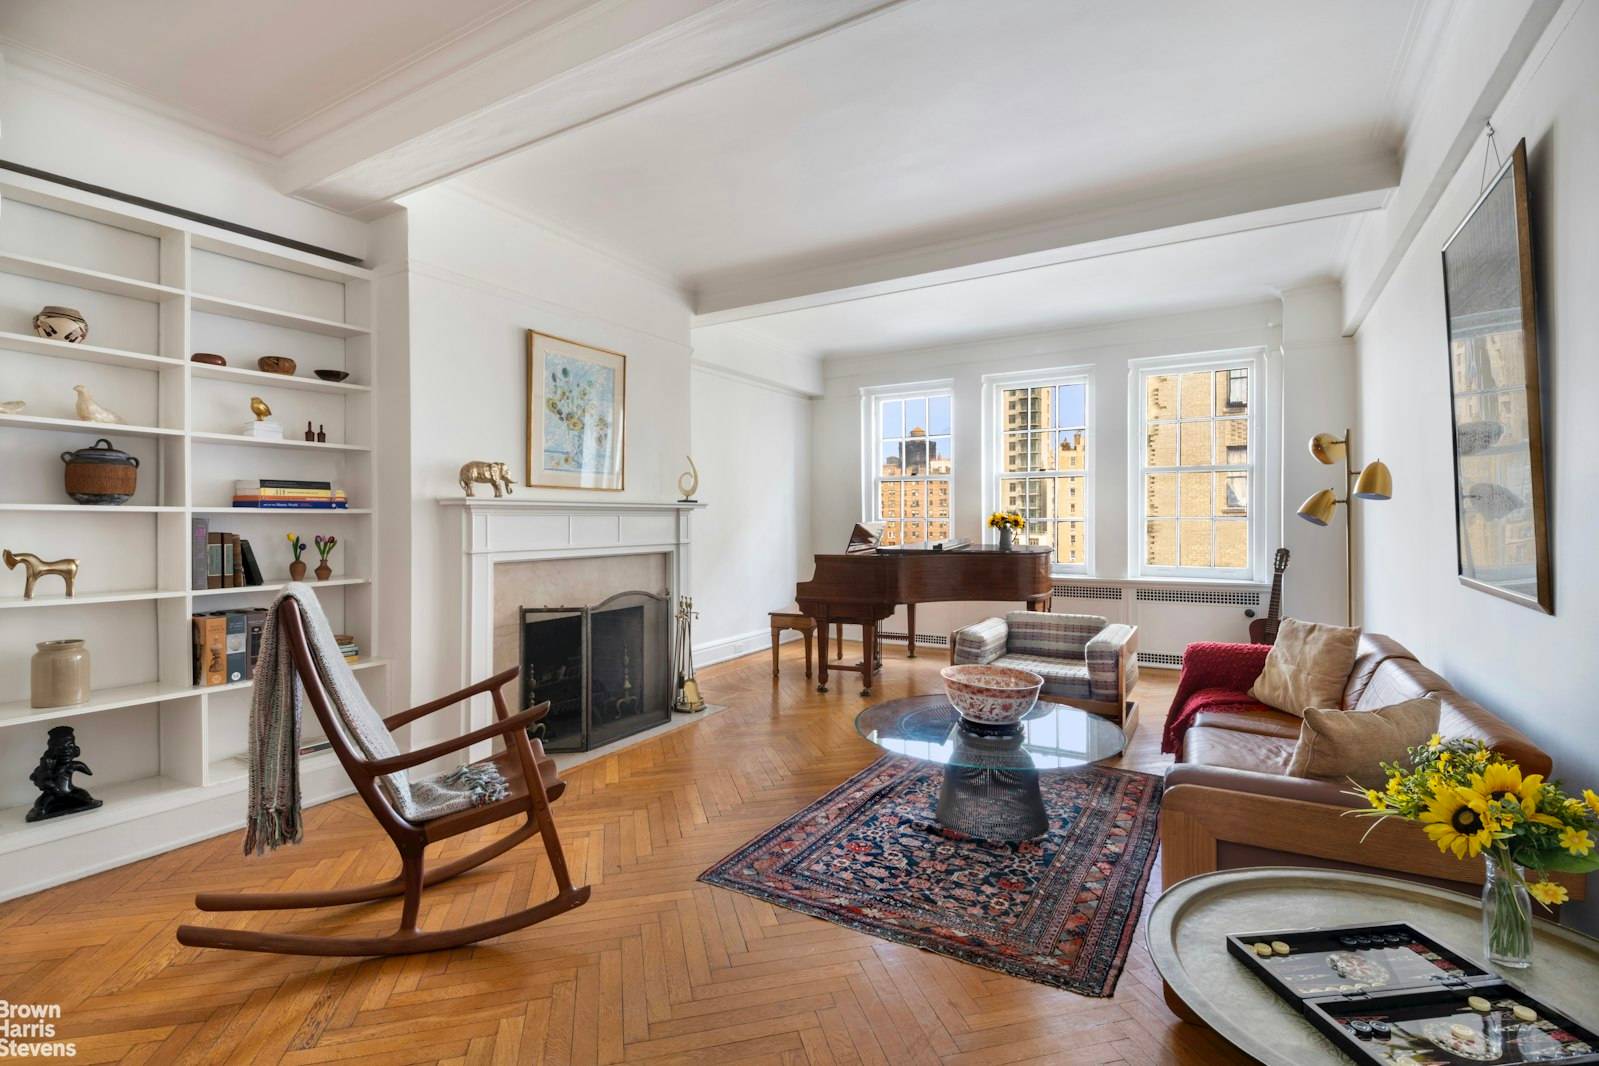 Situated in a prestigious pre war building located along Central Park West, an exceptional opportunity awaits to transform this six room residence into your dream home.